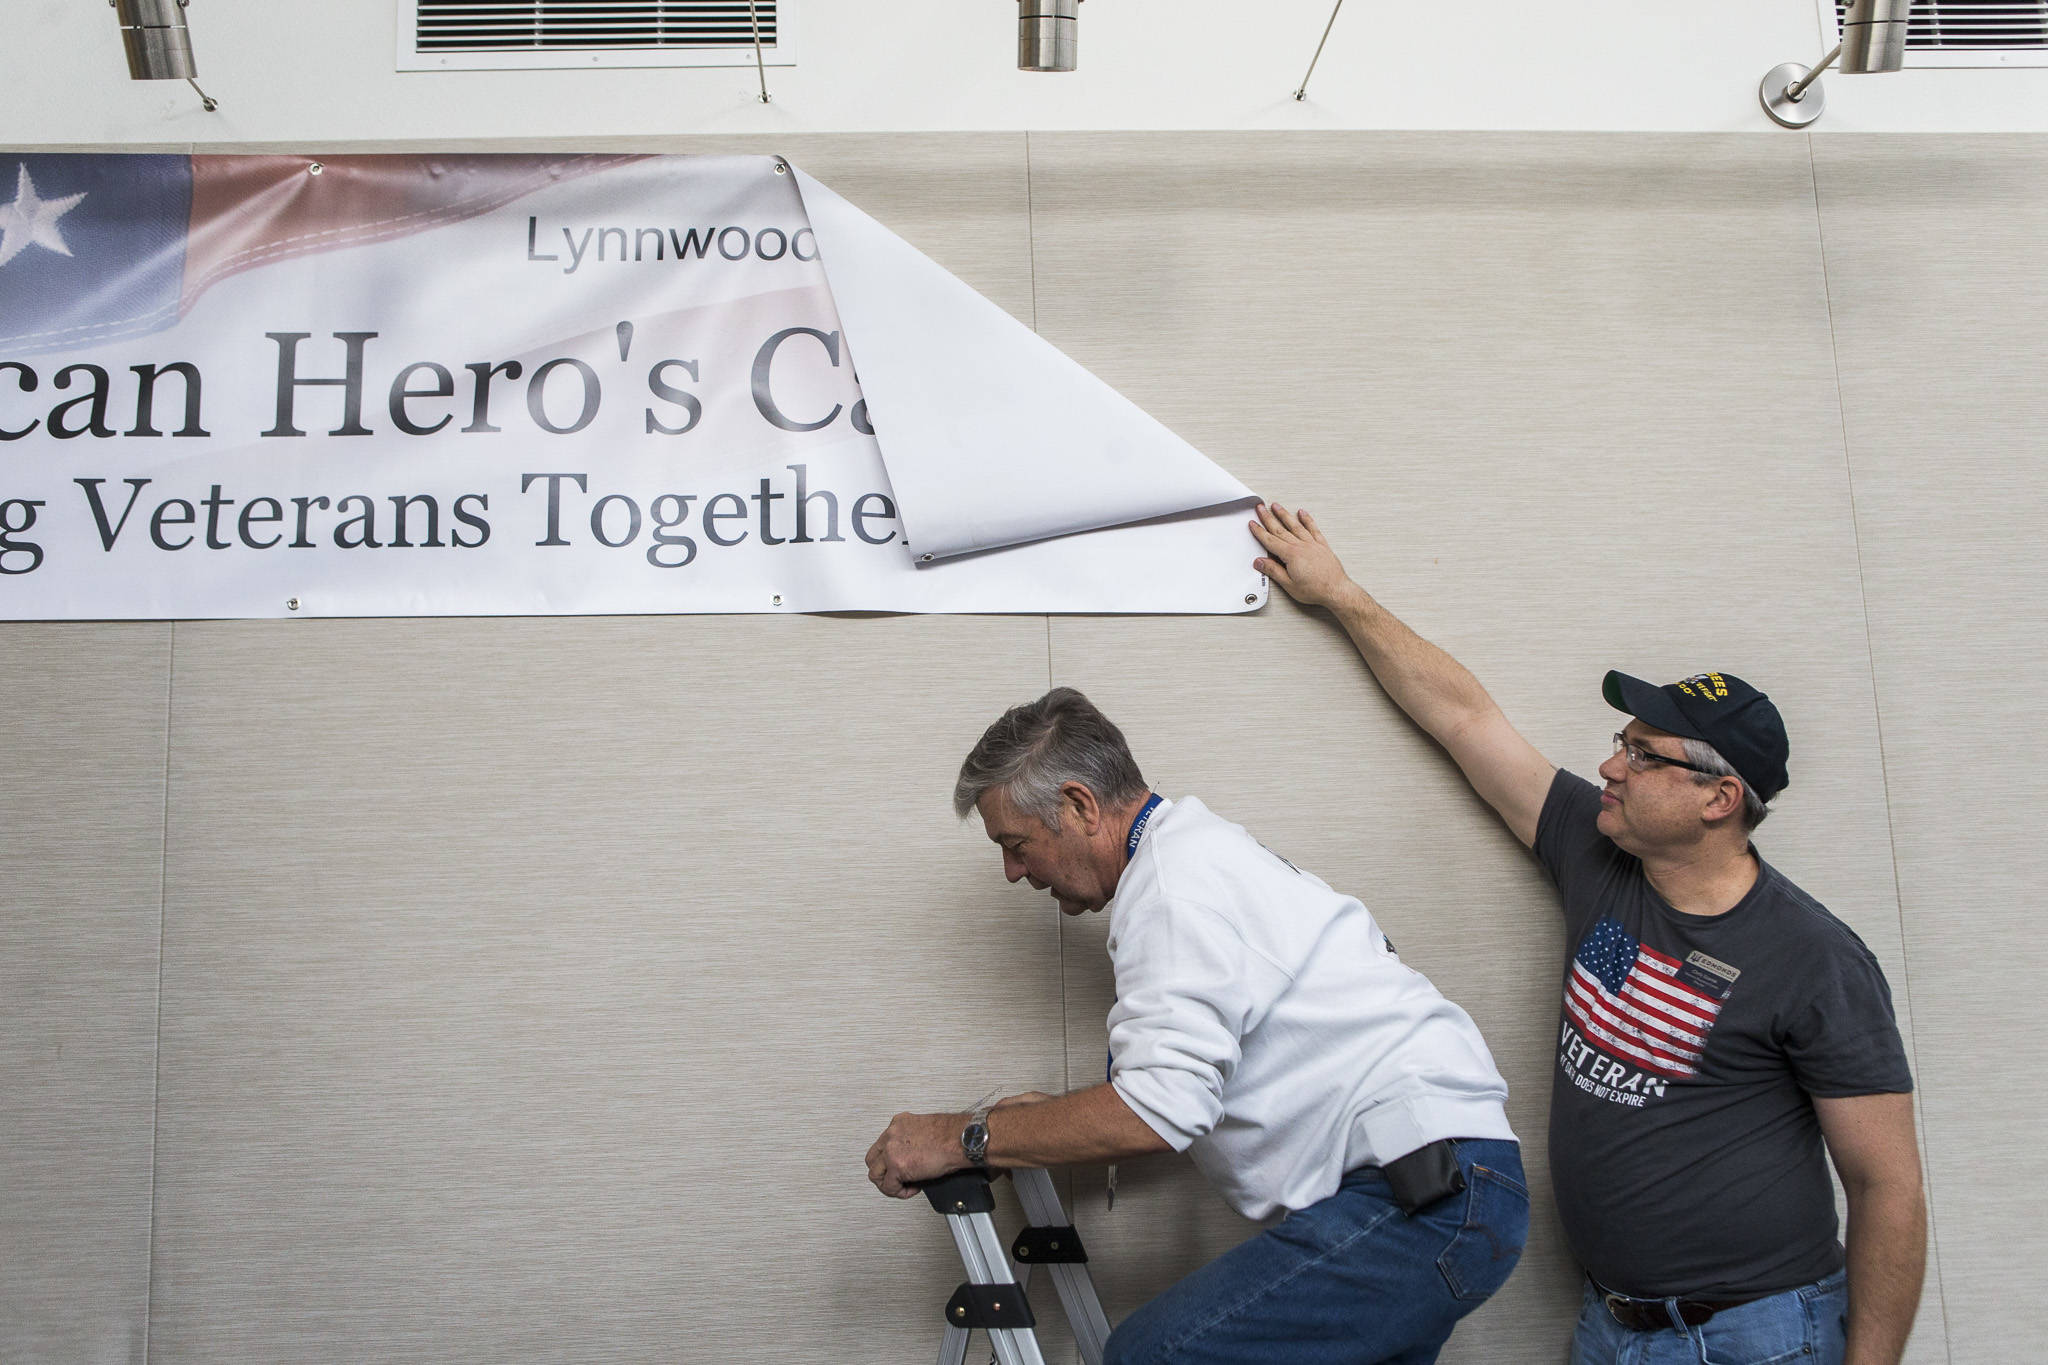 Volunteer Chris Szarek (right) holds up the Hero’s Cafe banner as Steve Pennington climbs the ladder to finish hanging it before the start of the Hero’s Cafe at the Verdant Community Wellness Center on Nov. 26. (Olivia Vanni / The Herald)